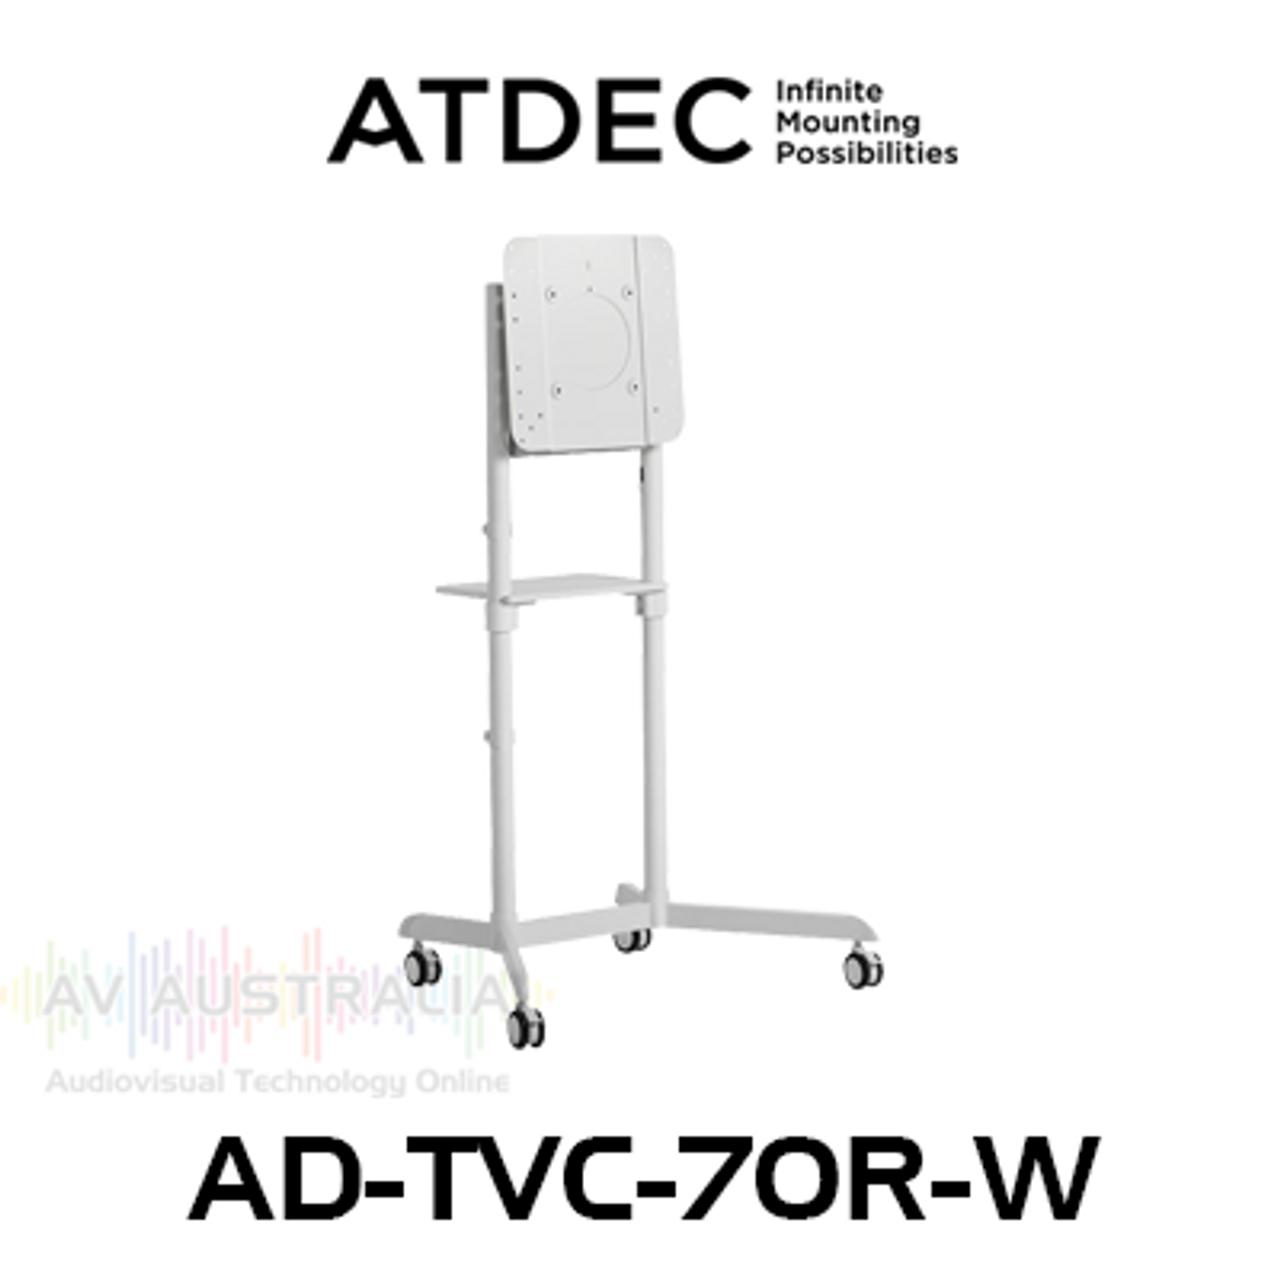 Atdec AD-TVC-70R-W Mobile TV Trolley With Display Rotation (up to 70kg)